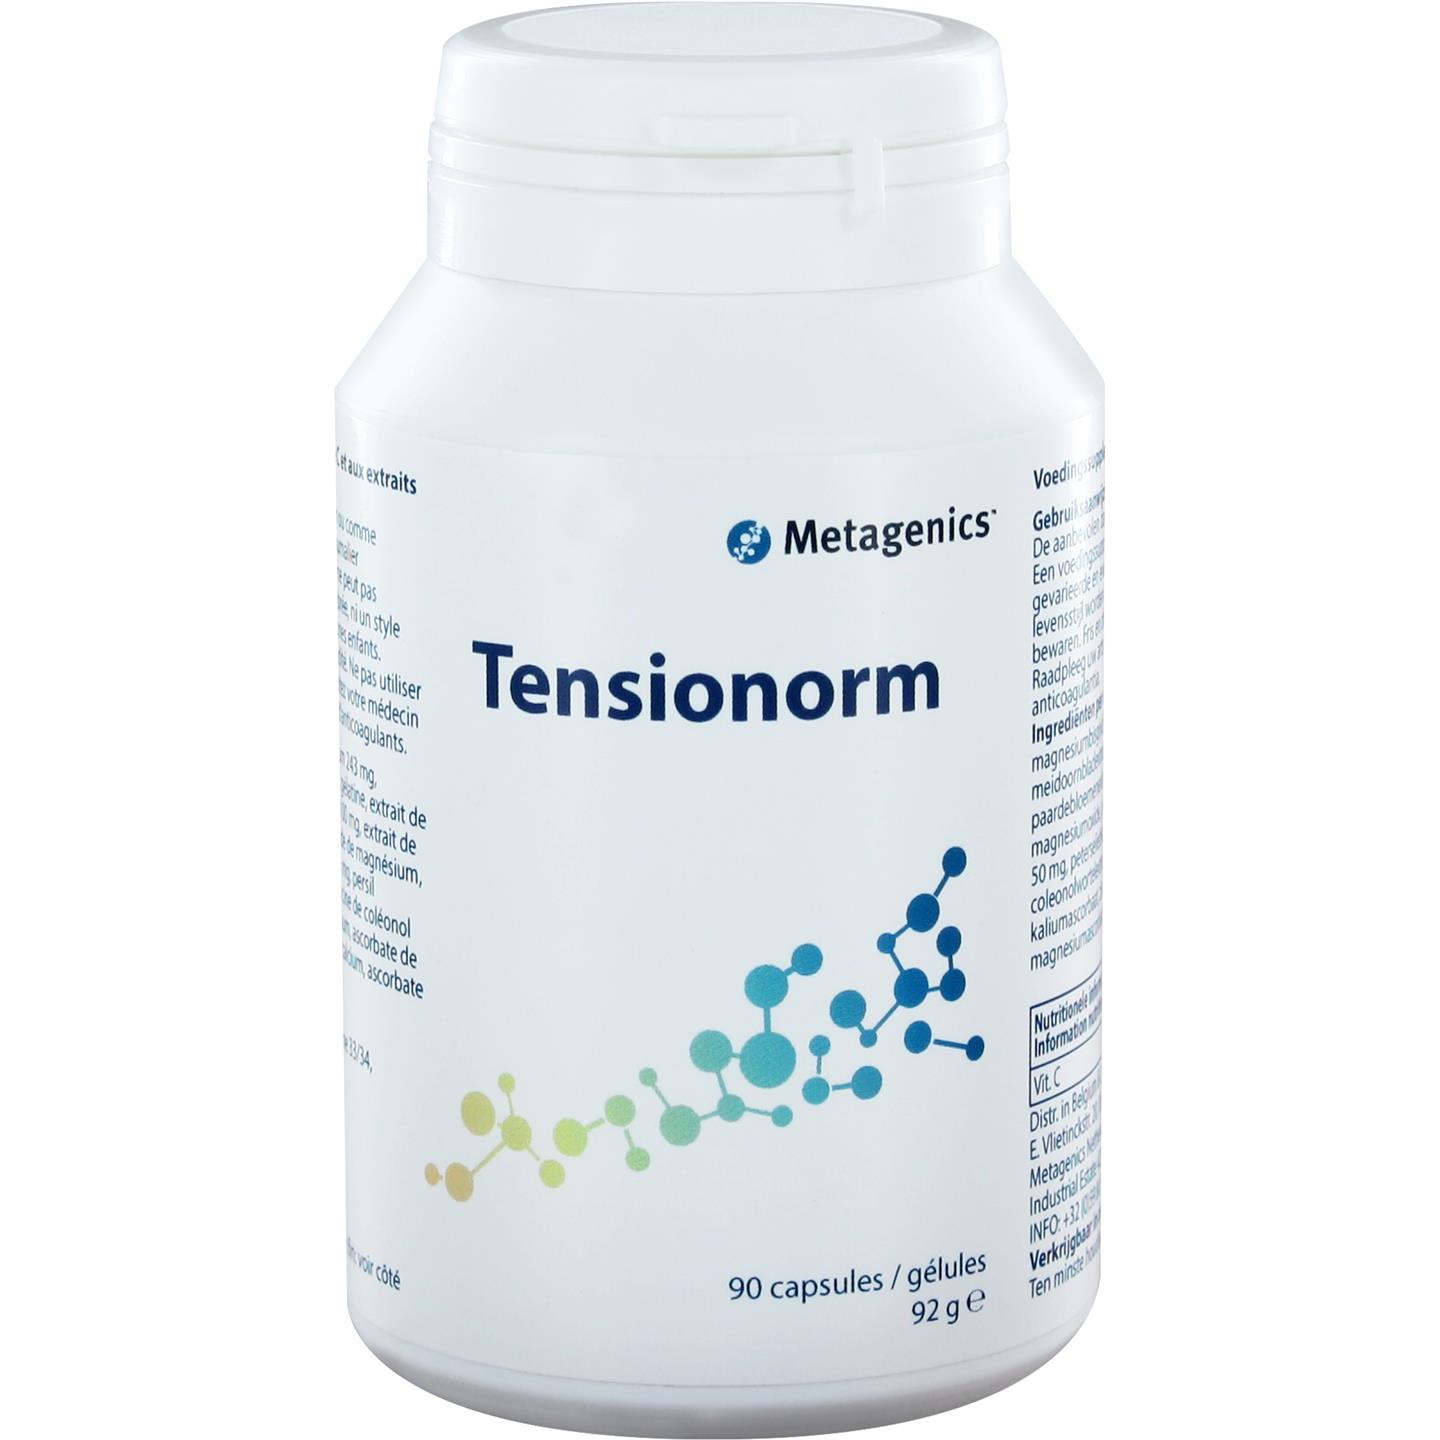 Tensionorm